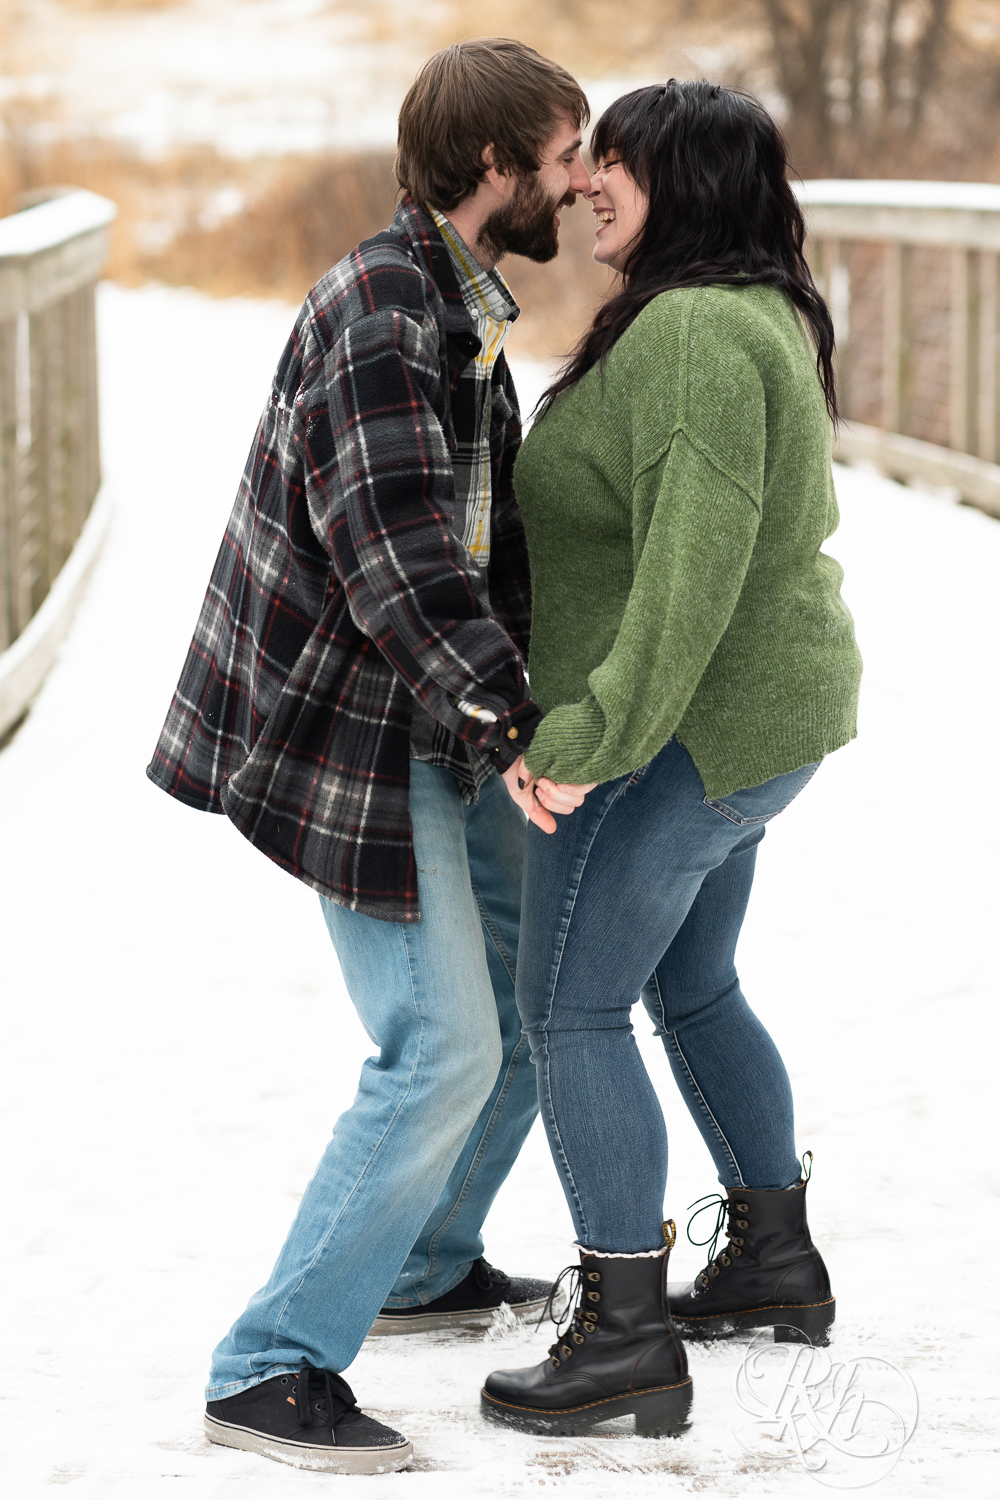 Man in flannel and woman in green sweater and jeans laugh on snowy bridge at Lebanon Hills in Eagan, Minnesota.